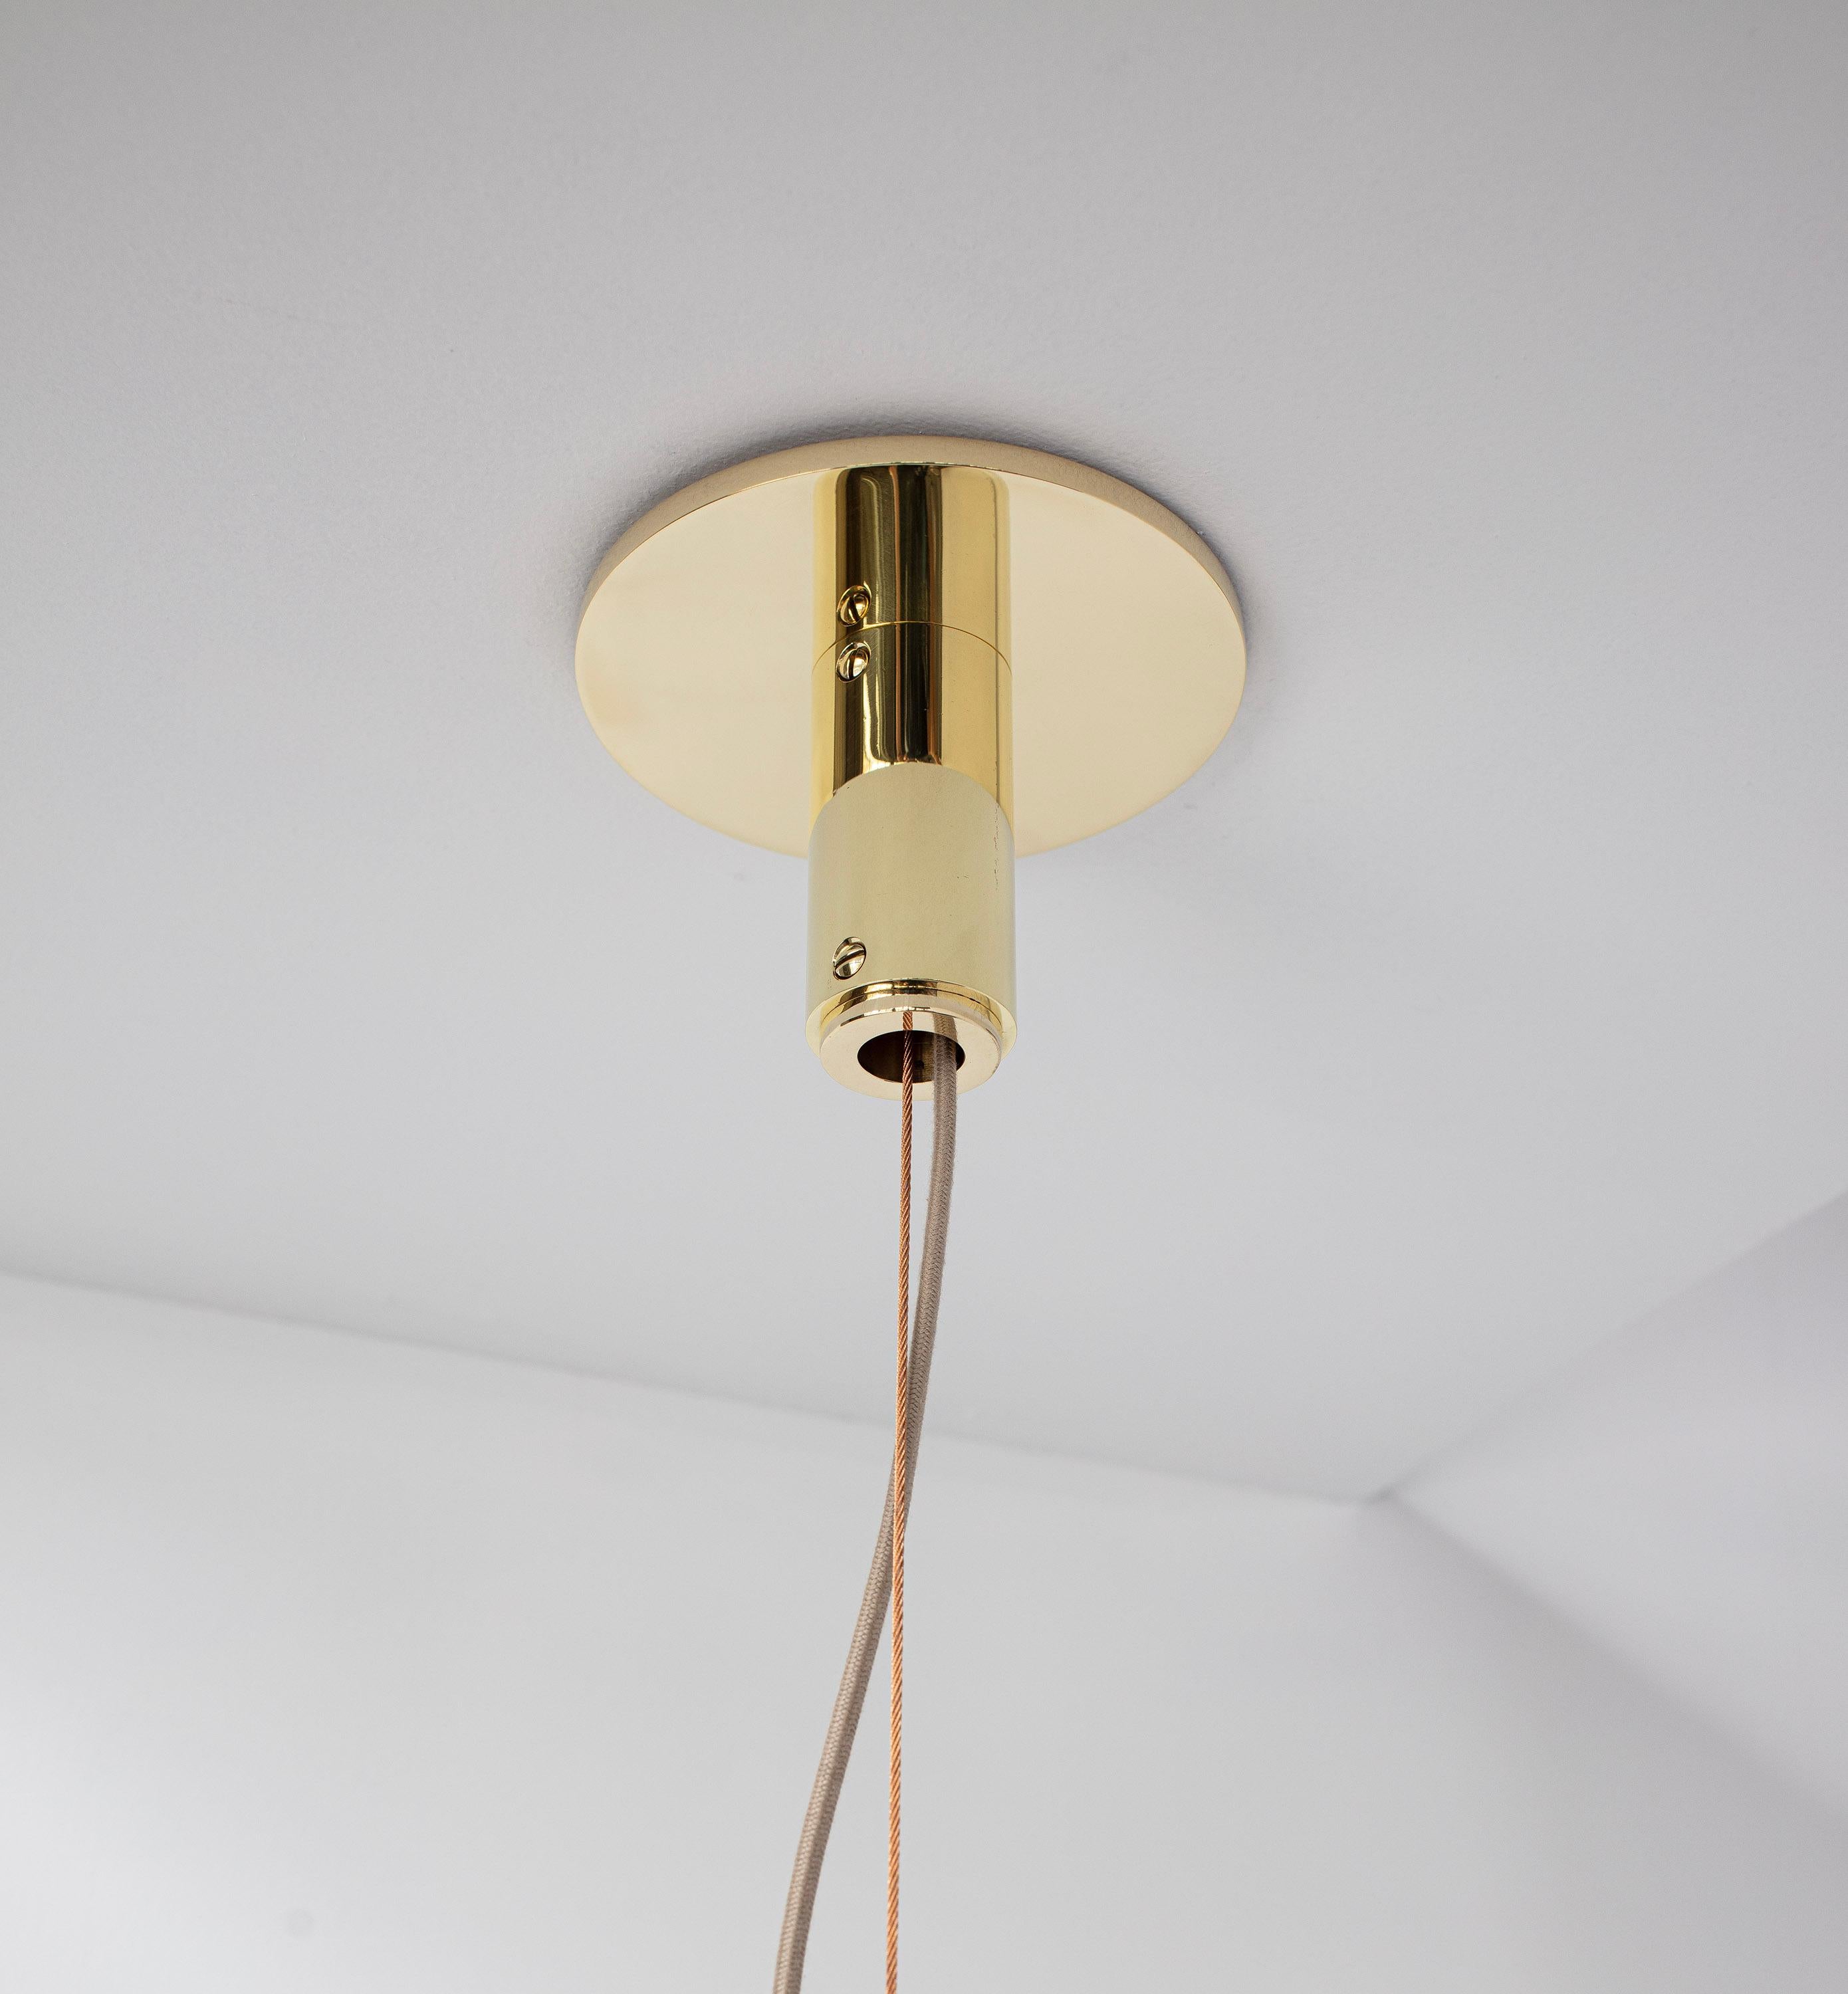 Series 02 Pendant, Polished Unlacquered Brass, Large Goatskin Parchment Shade For Sale 2